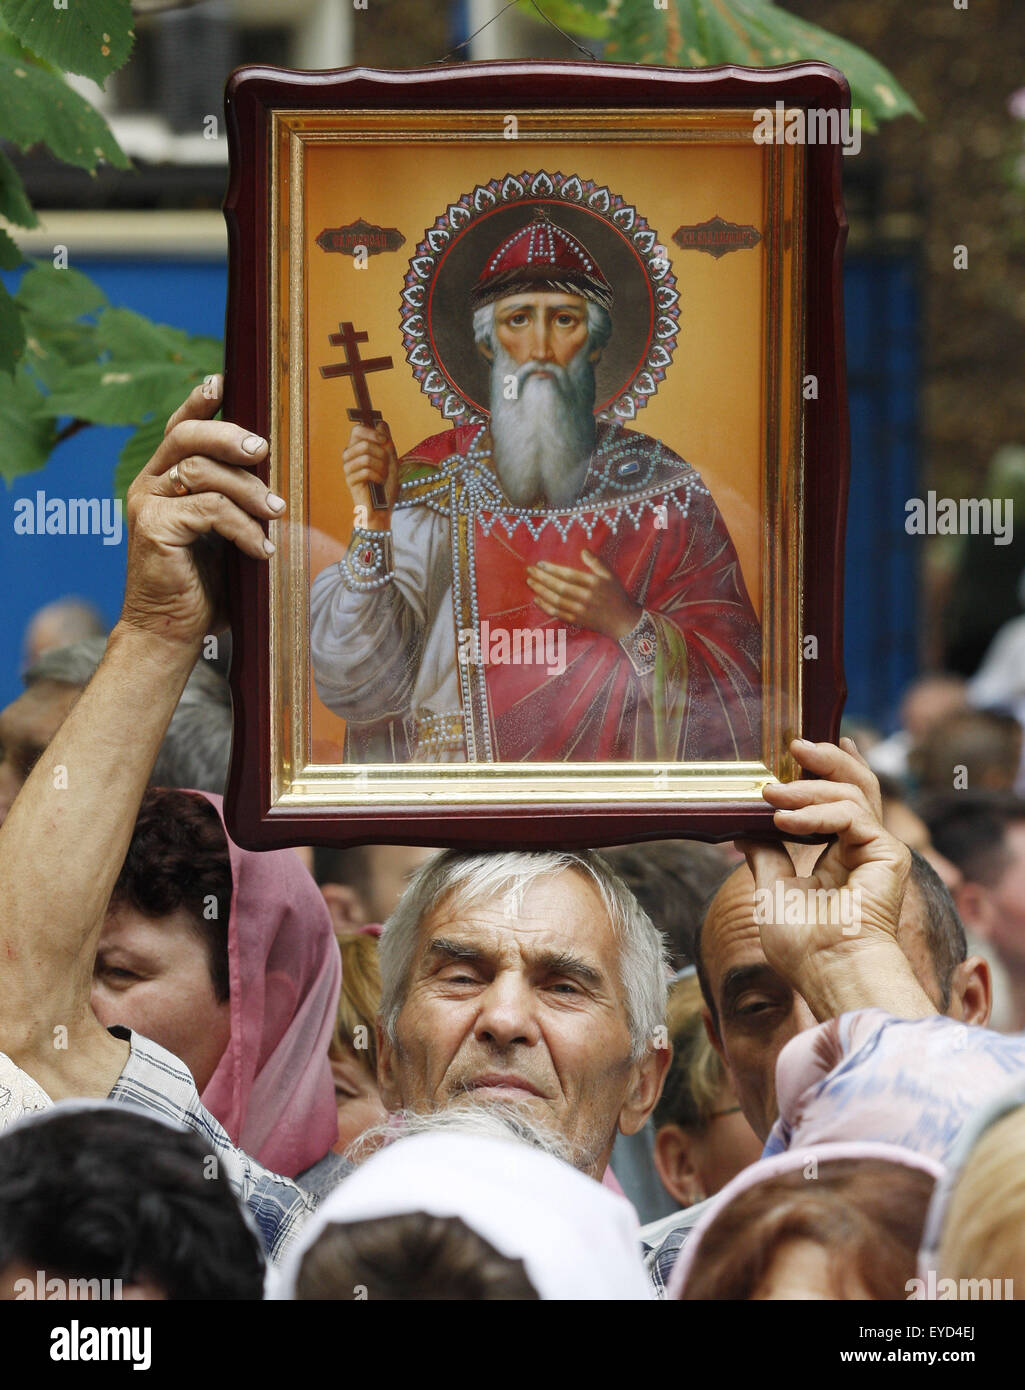 Kiev, Ukraine. 27th July, 2015. Believer take a part in a prayer service marking the 1000th anniversary of the Repose of Vladimir the Great at St. Vladimirs Hill in Kiev, Ukraine, 27 July 2015. The Grand Prince of Kiev, Vladimir the Great, also known as St. Vladimir, Vladimir the Baptizer of Rus and Vladimir the Red Sun, was the first Christian ruler in the Kievan Rus who christianized the region. Orthodox believers will mark the 1027th anniversary of Kievan Rus Christianization on 28 July. © Serg Glovny/ZUMA Wire/Alamy Live News Stock Photo